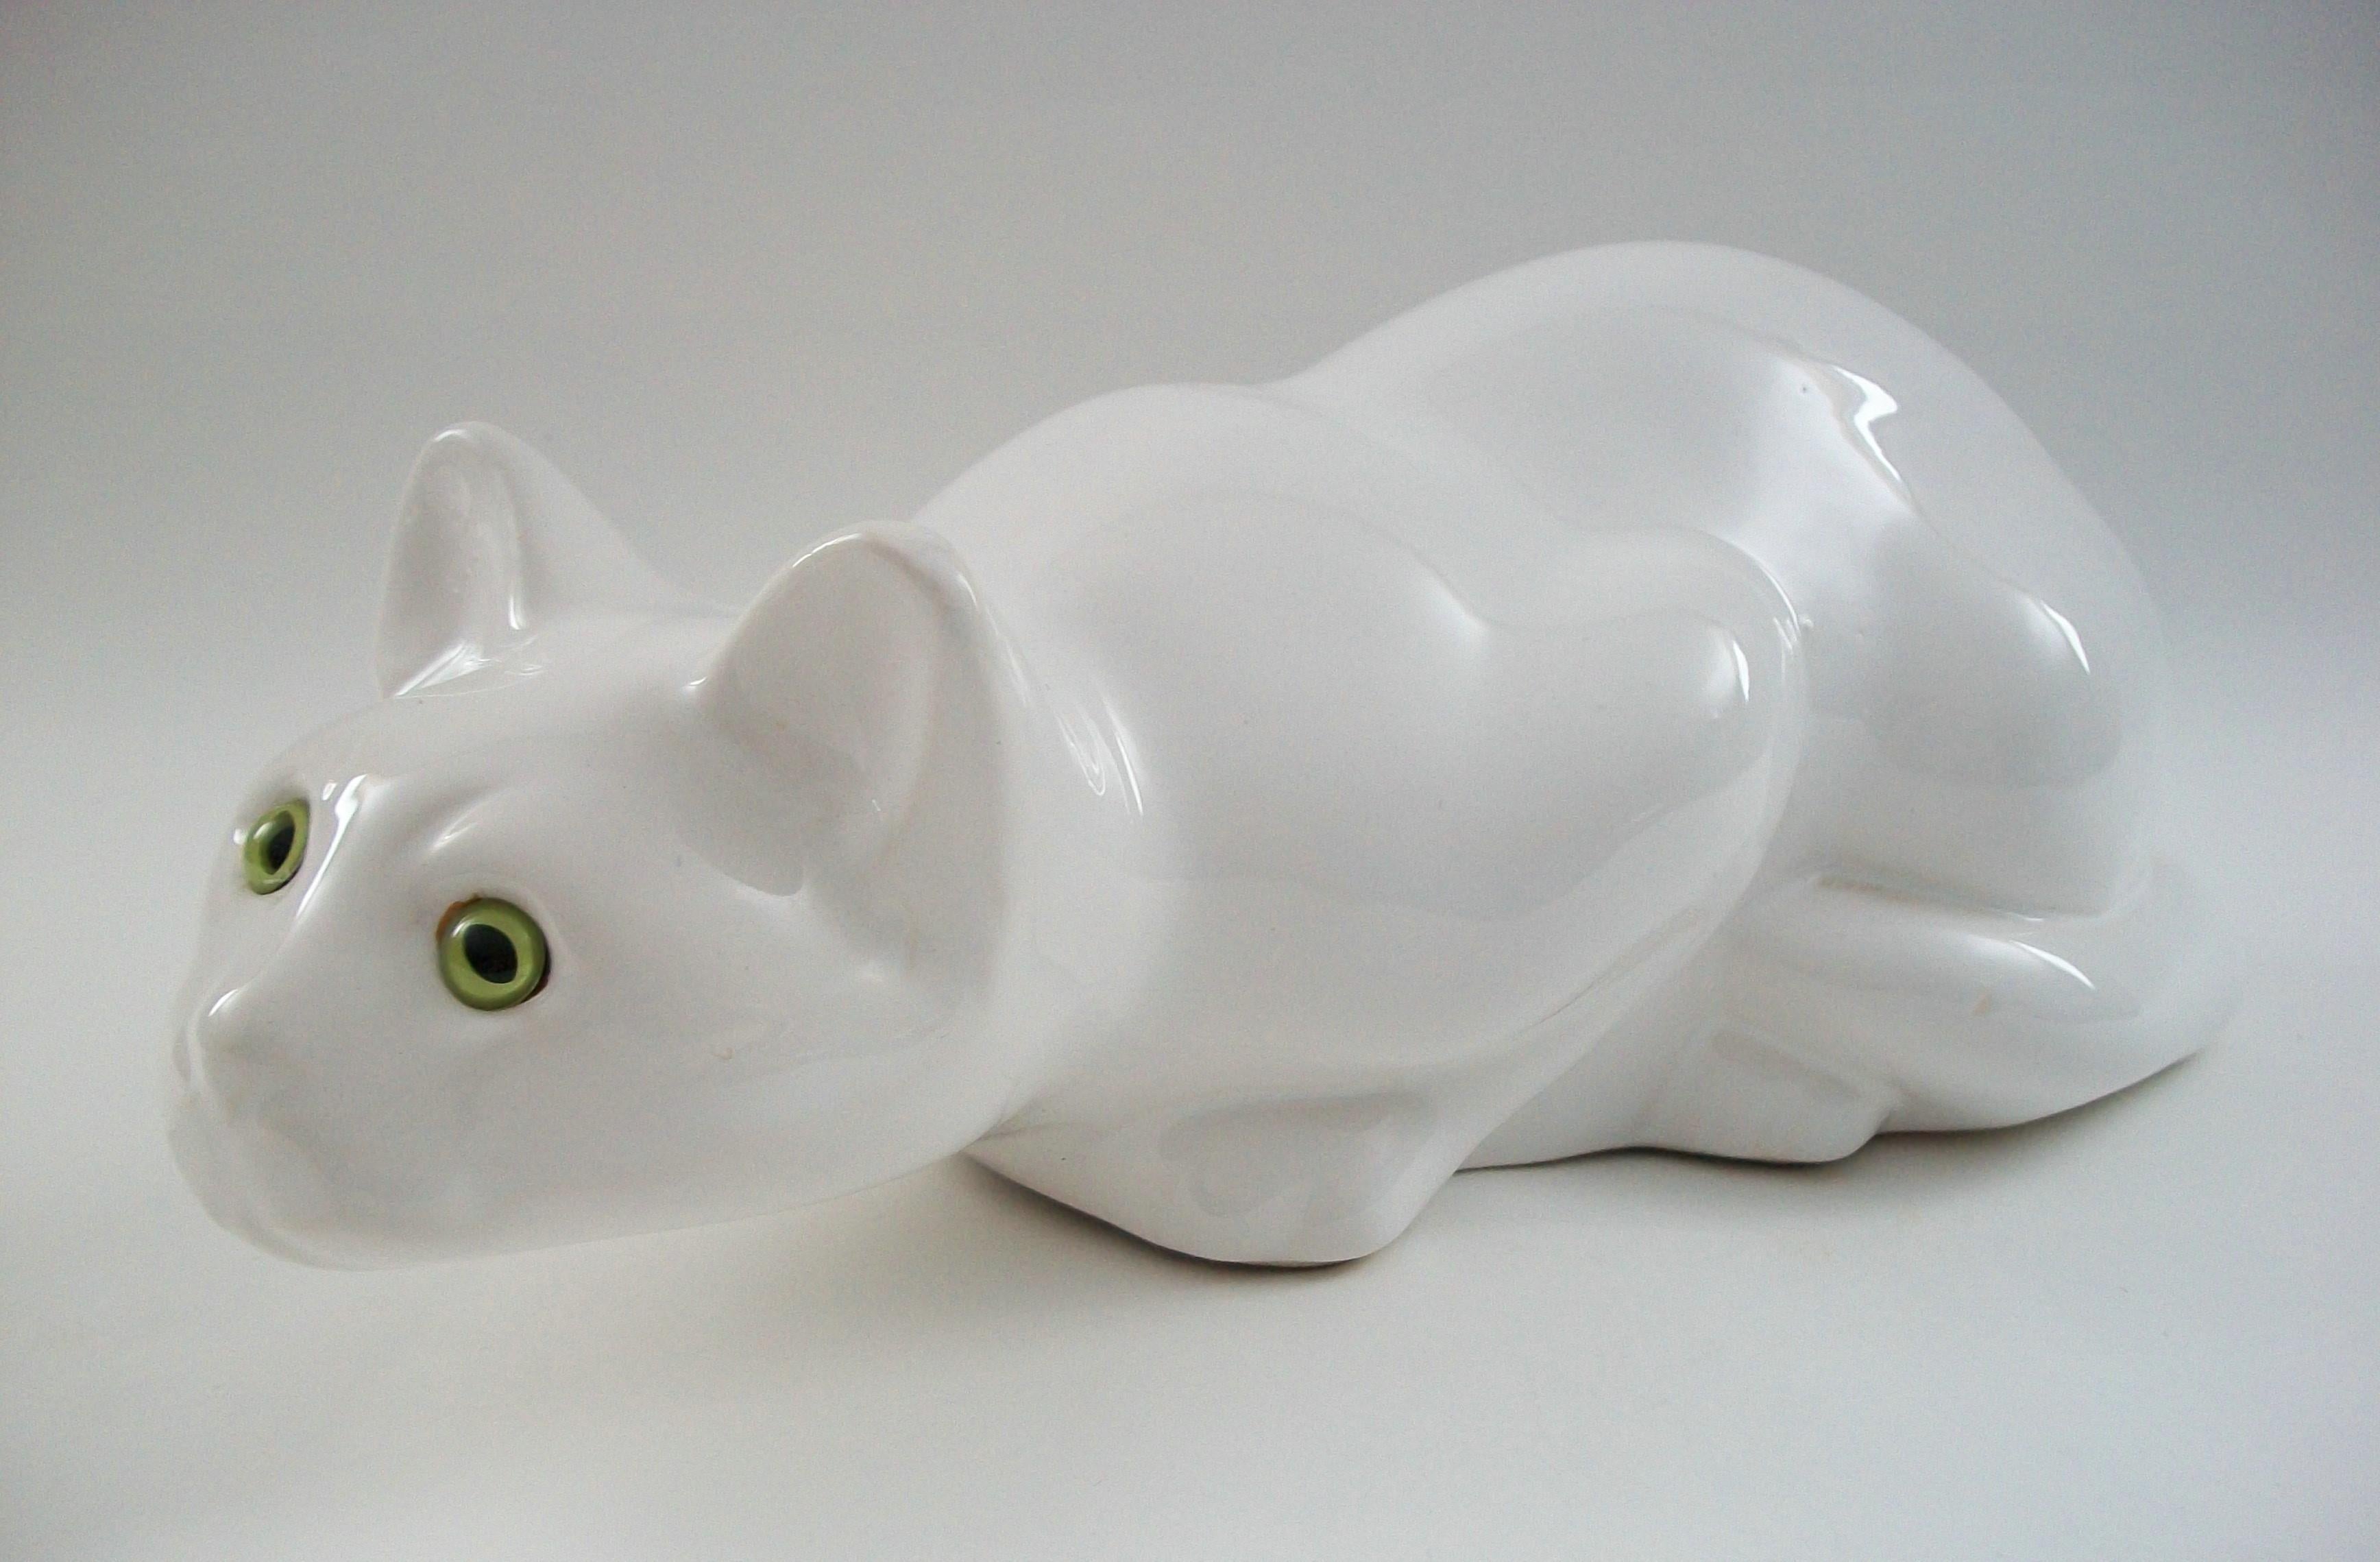 Vintage ceramic cat with green glass eyes - life size model - featuring an over-all white glaze - glazed interior - unsigned - Italy - circa 1980's.

Excellent vintage condition - minor glaze chip to one ear - glaze stress crack (as photographed) -